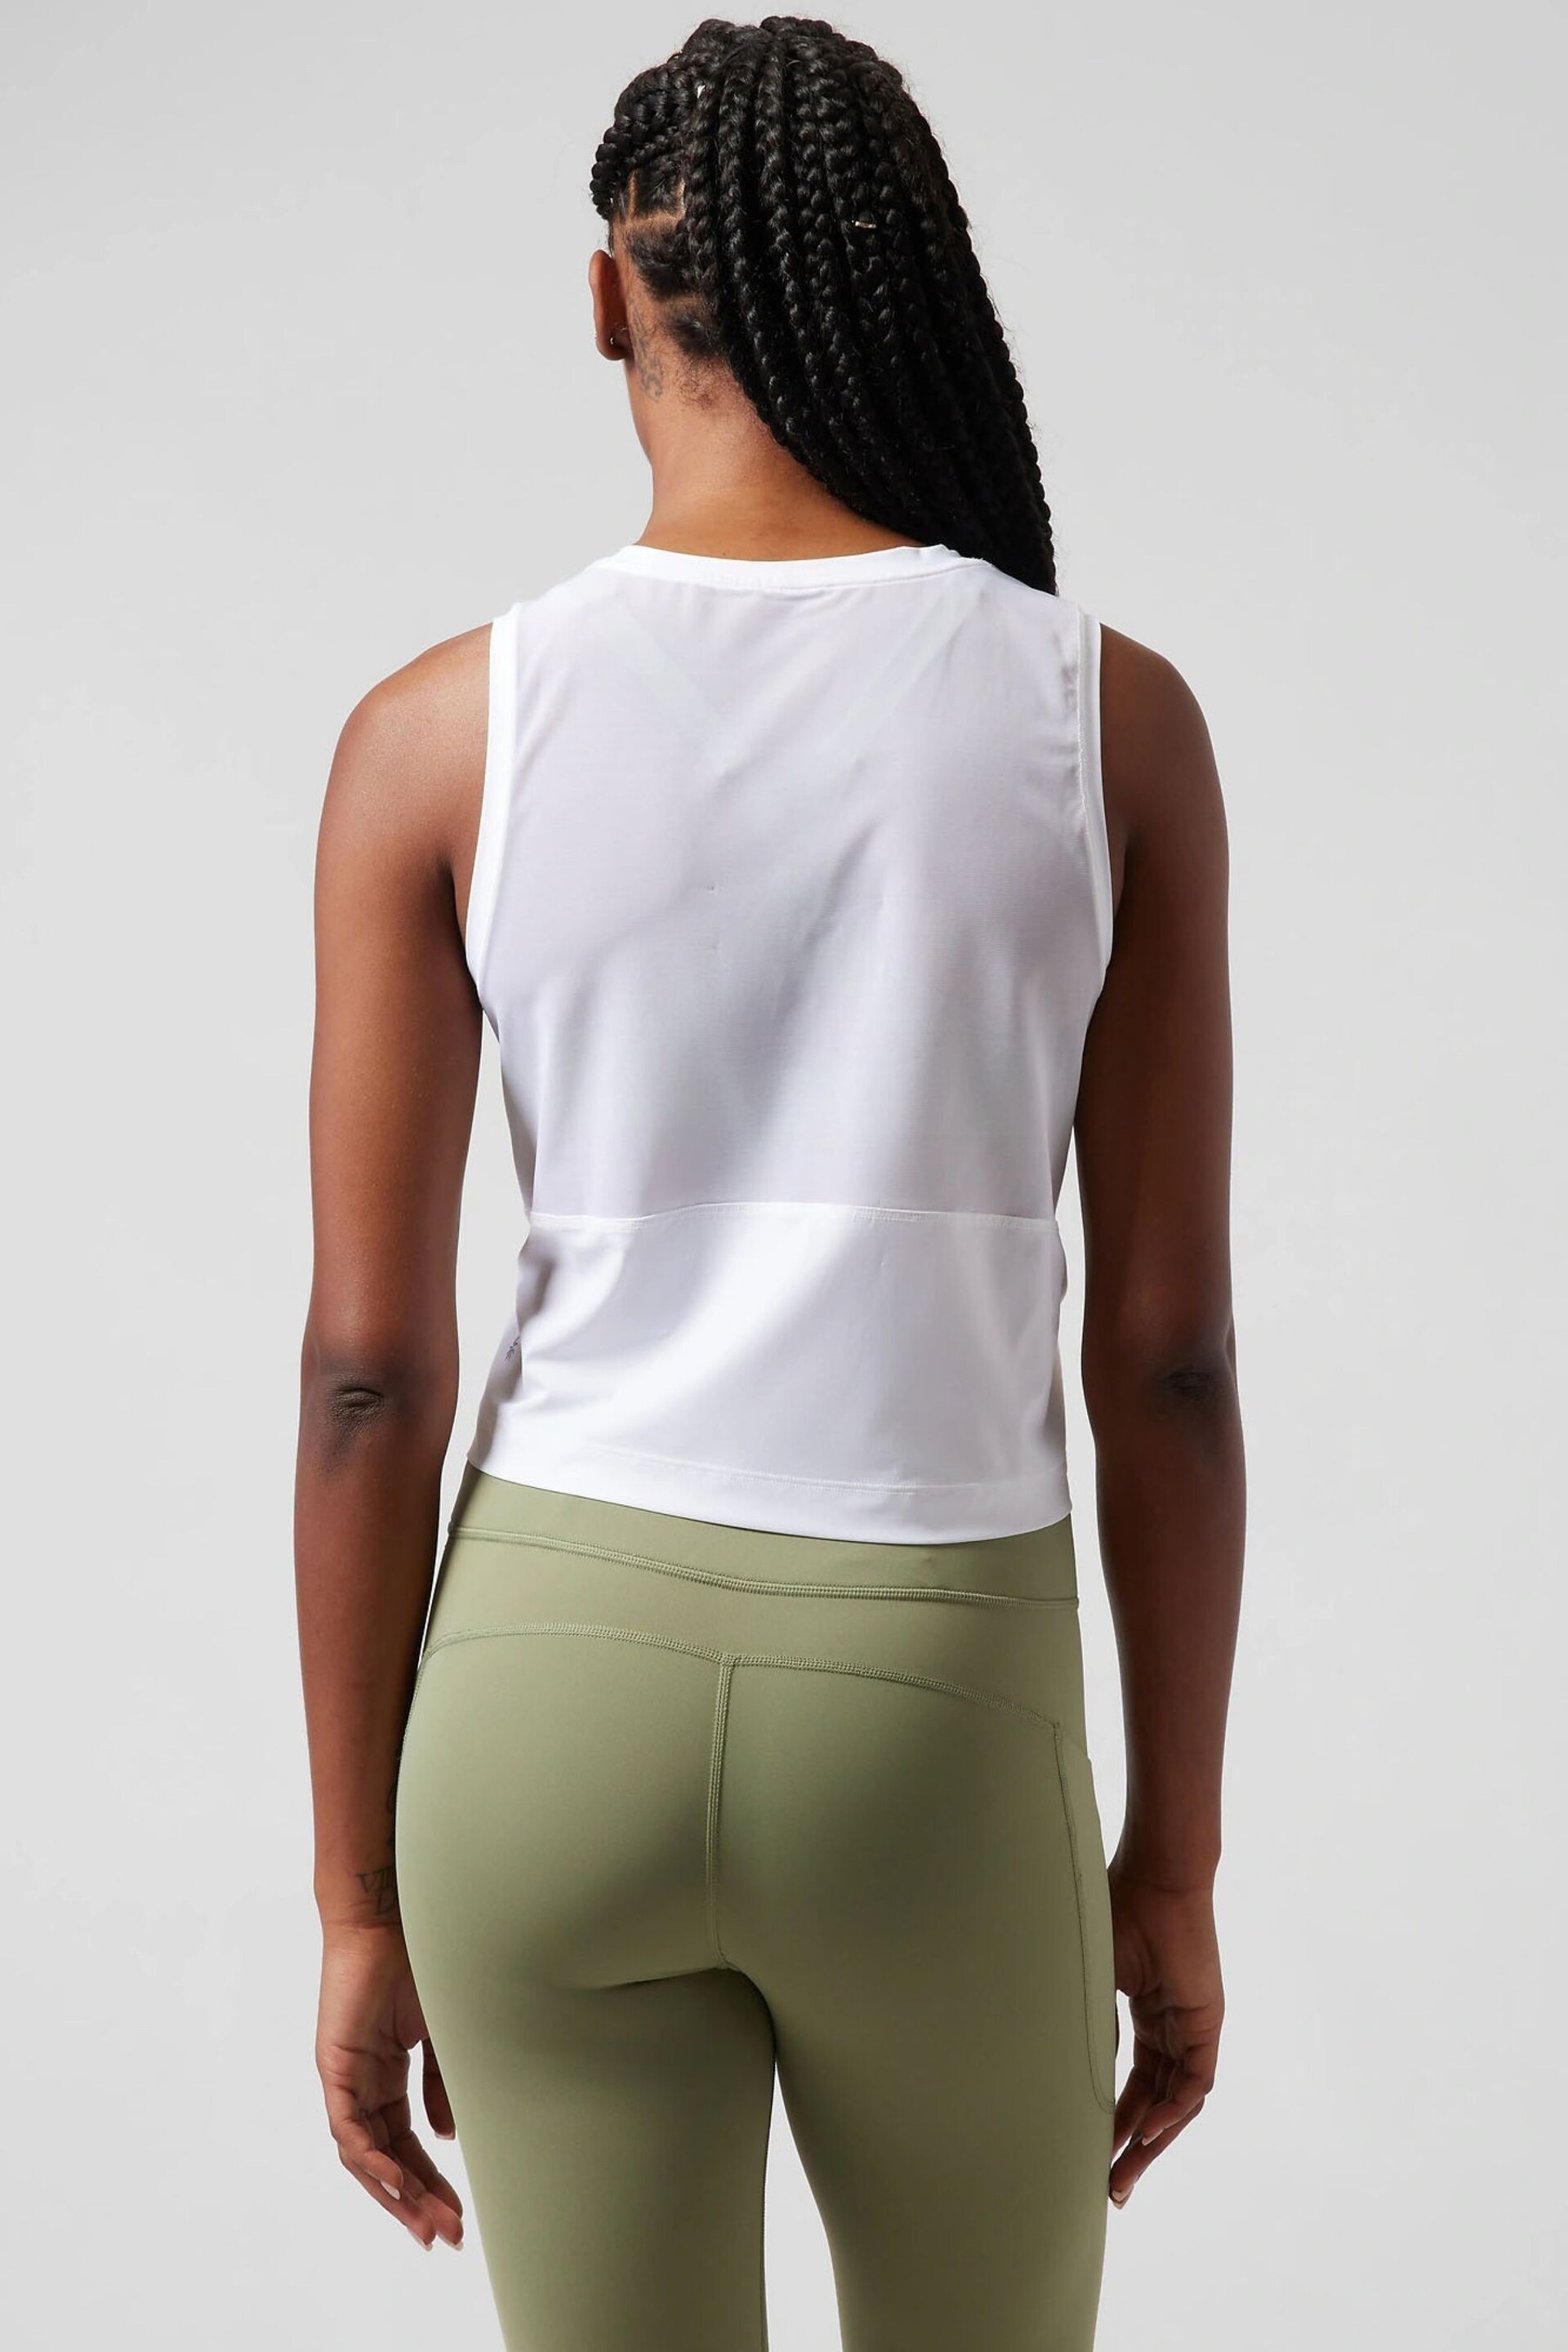 Athleta White Ultimate Muscle Tank Top - Image 2 of 8